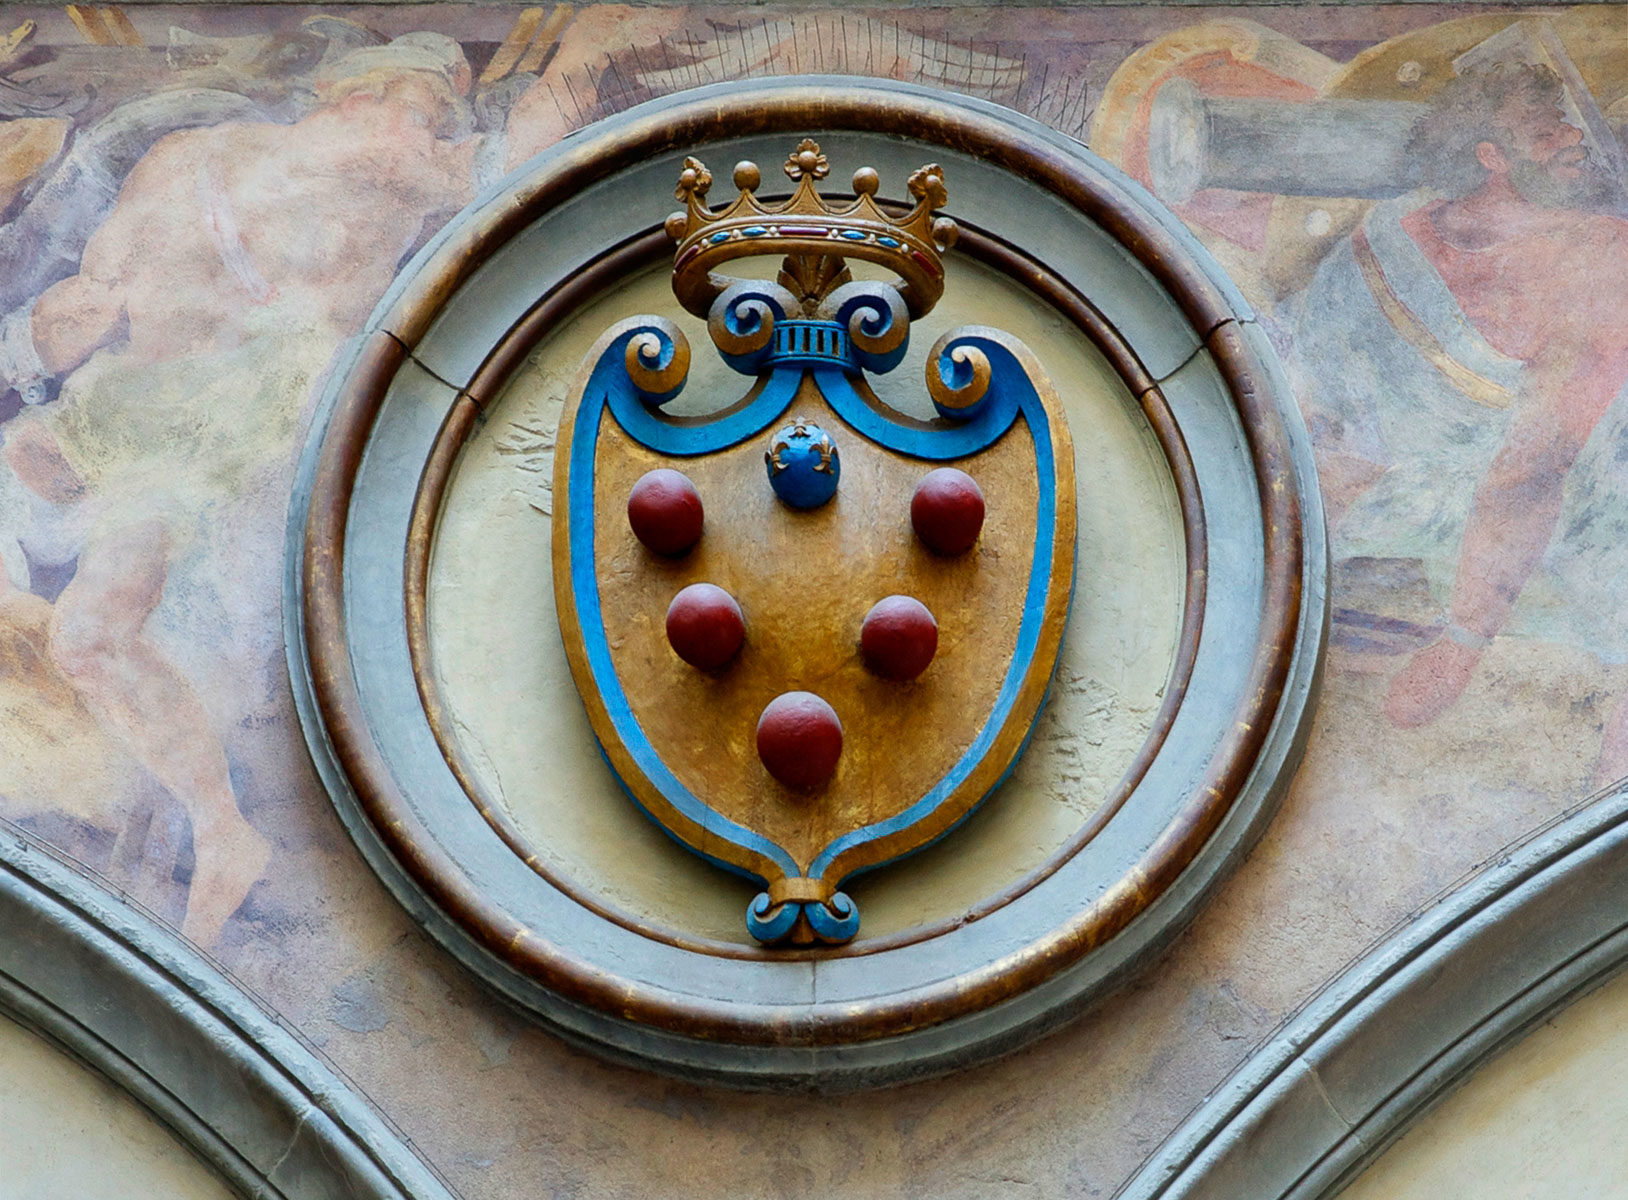 The Medici coat of arms is usually made up of 6 balls.